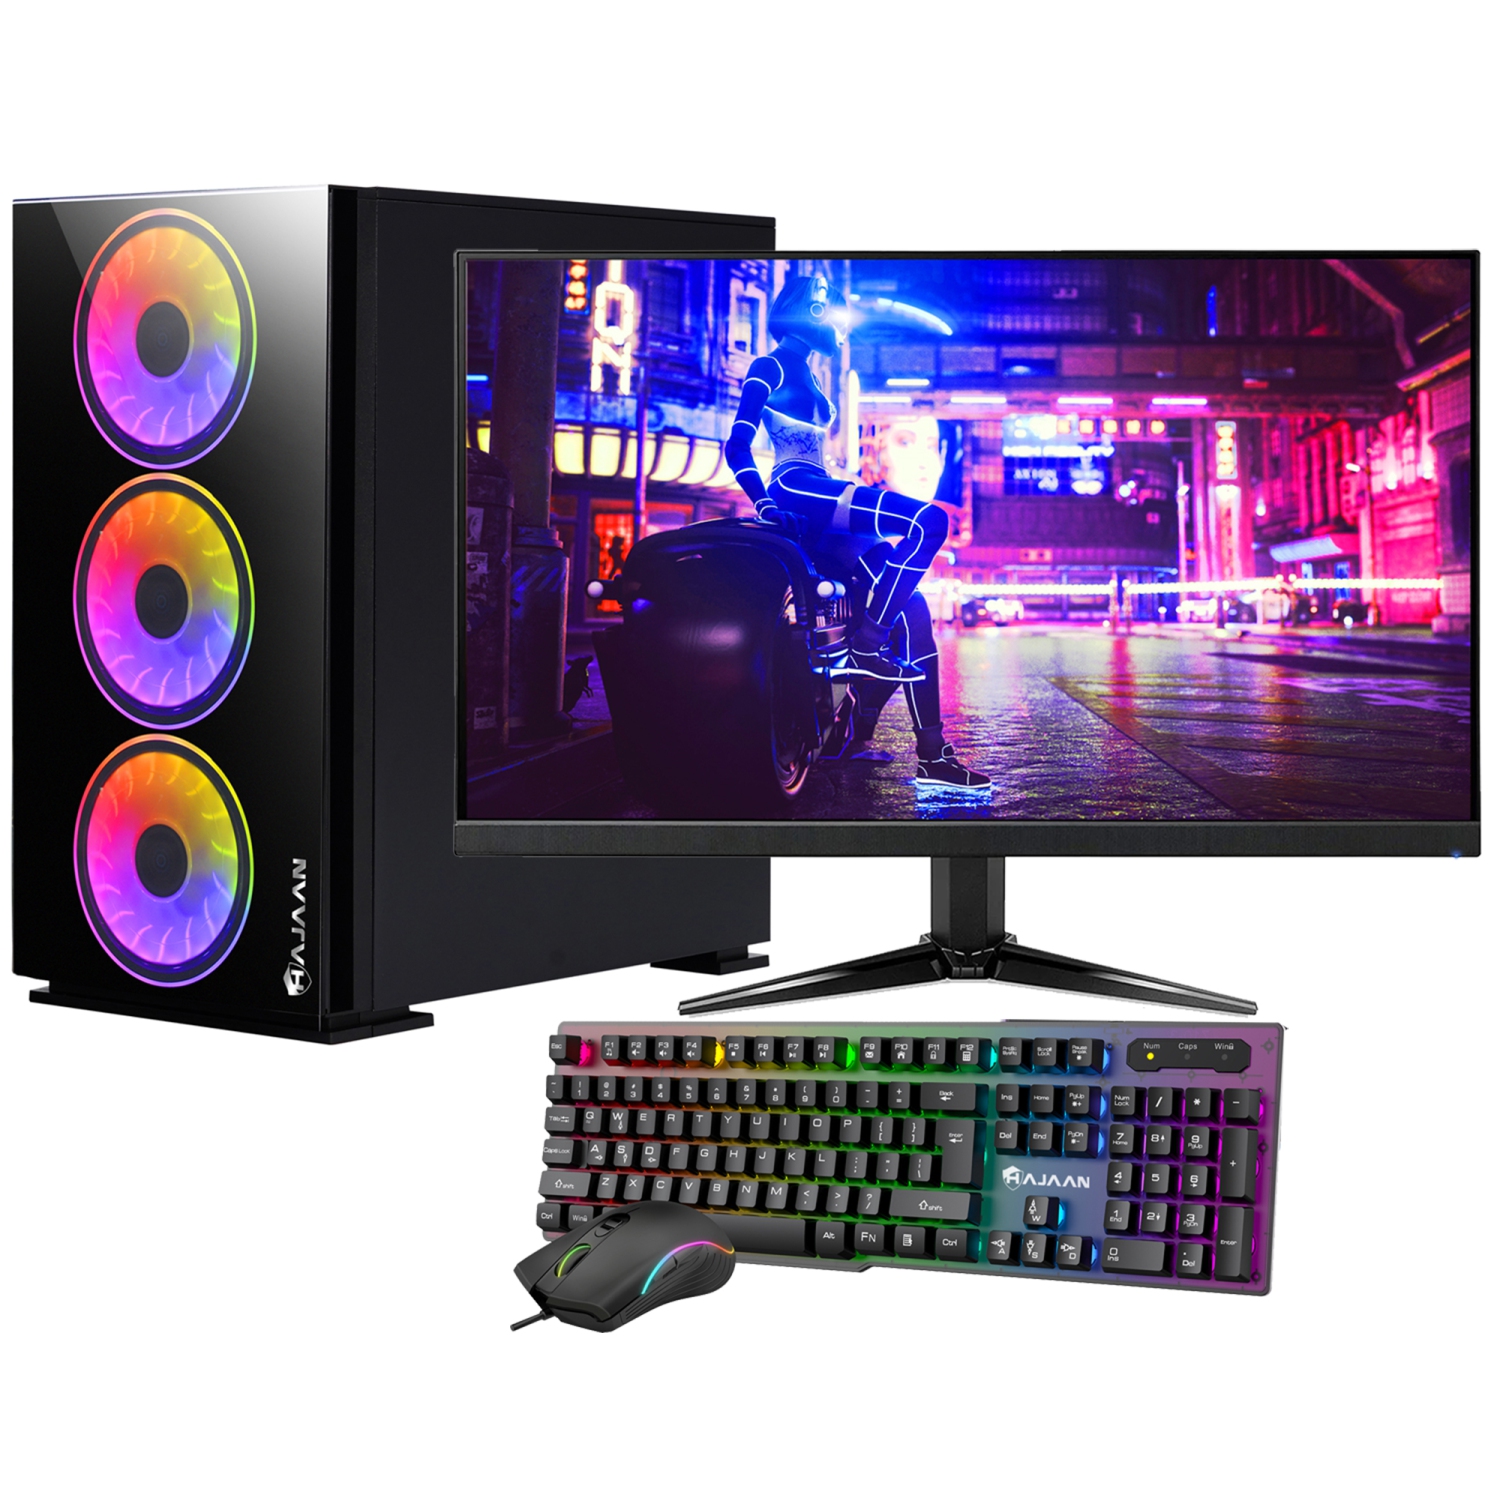 Refurbished (Excellent) Gaming PC Desktop Tower with 24″ Gaming Monitor, Intel Core i7 3.6GHz, AMD RX 550 4GB, 32GB RAM 1TB SSD, RGB Keyboard Mouse Headset, AC WiFi, Windows 10 Pro